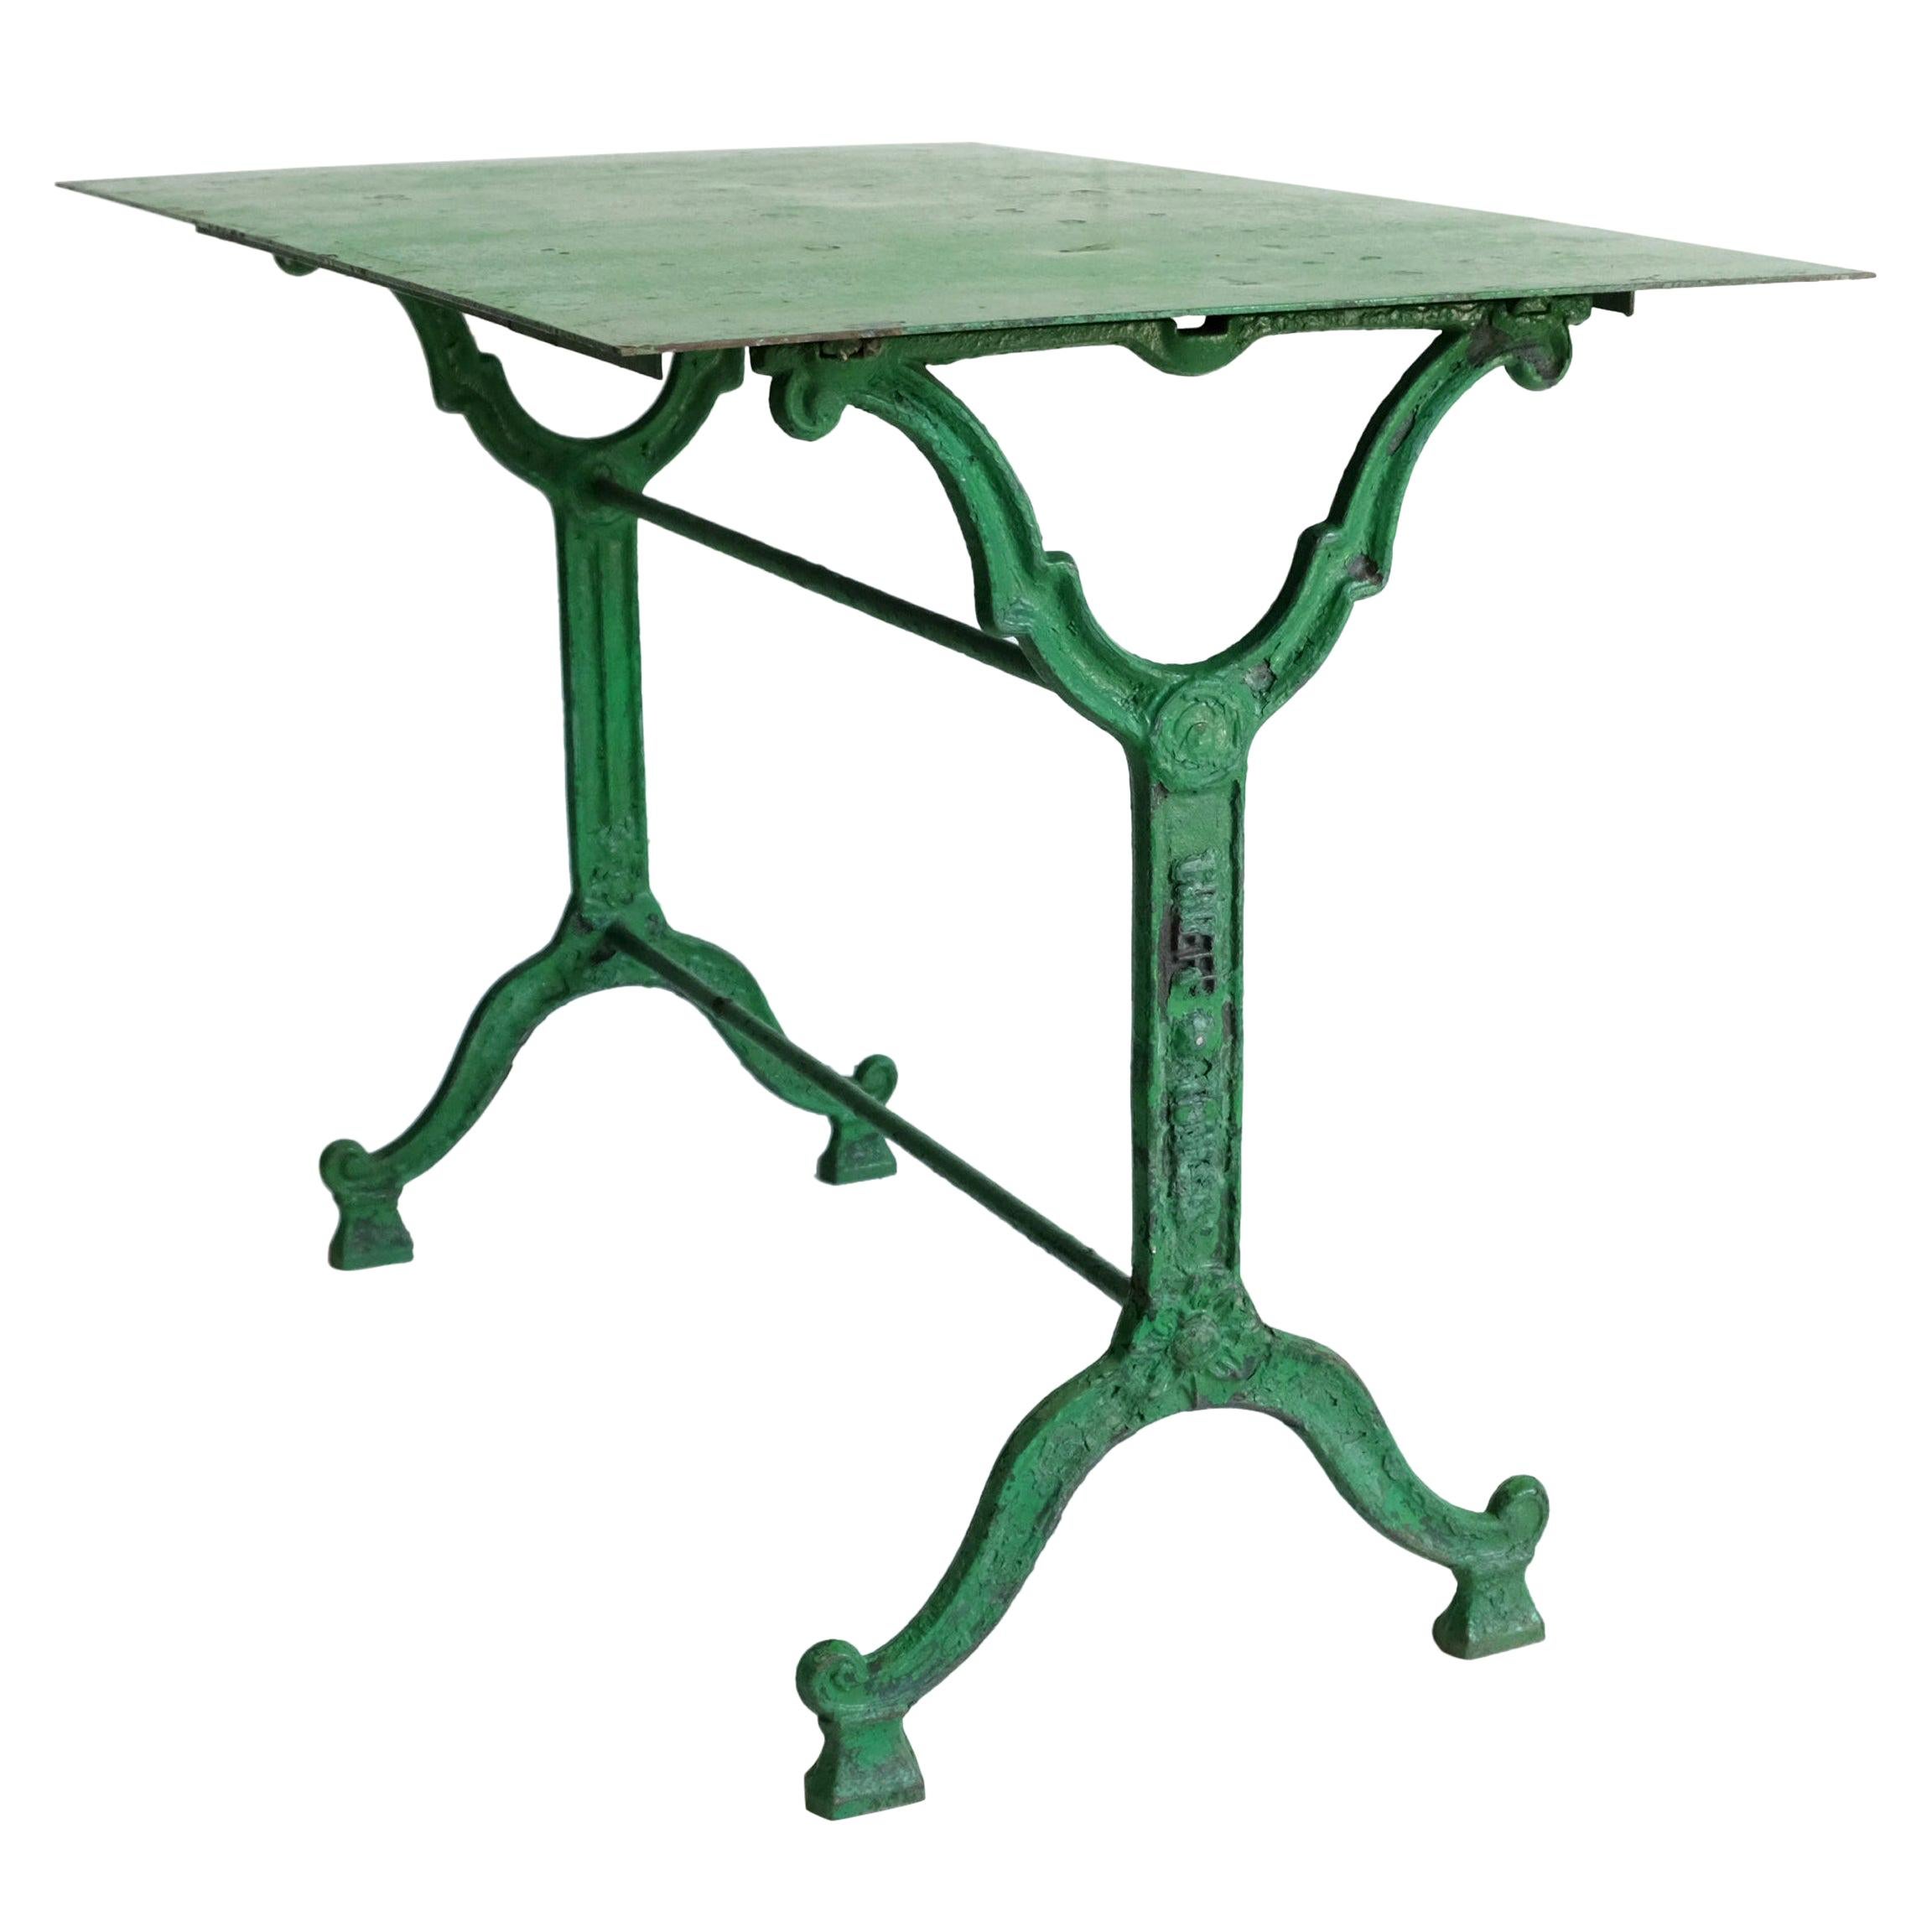 French Cast Iron Garden Table, Green, 19th Century, Bistro, Outdoor, Ornate